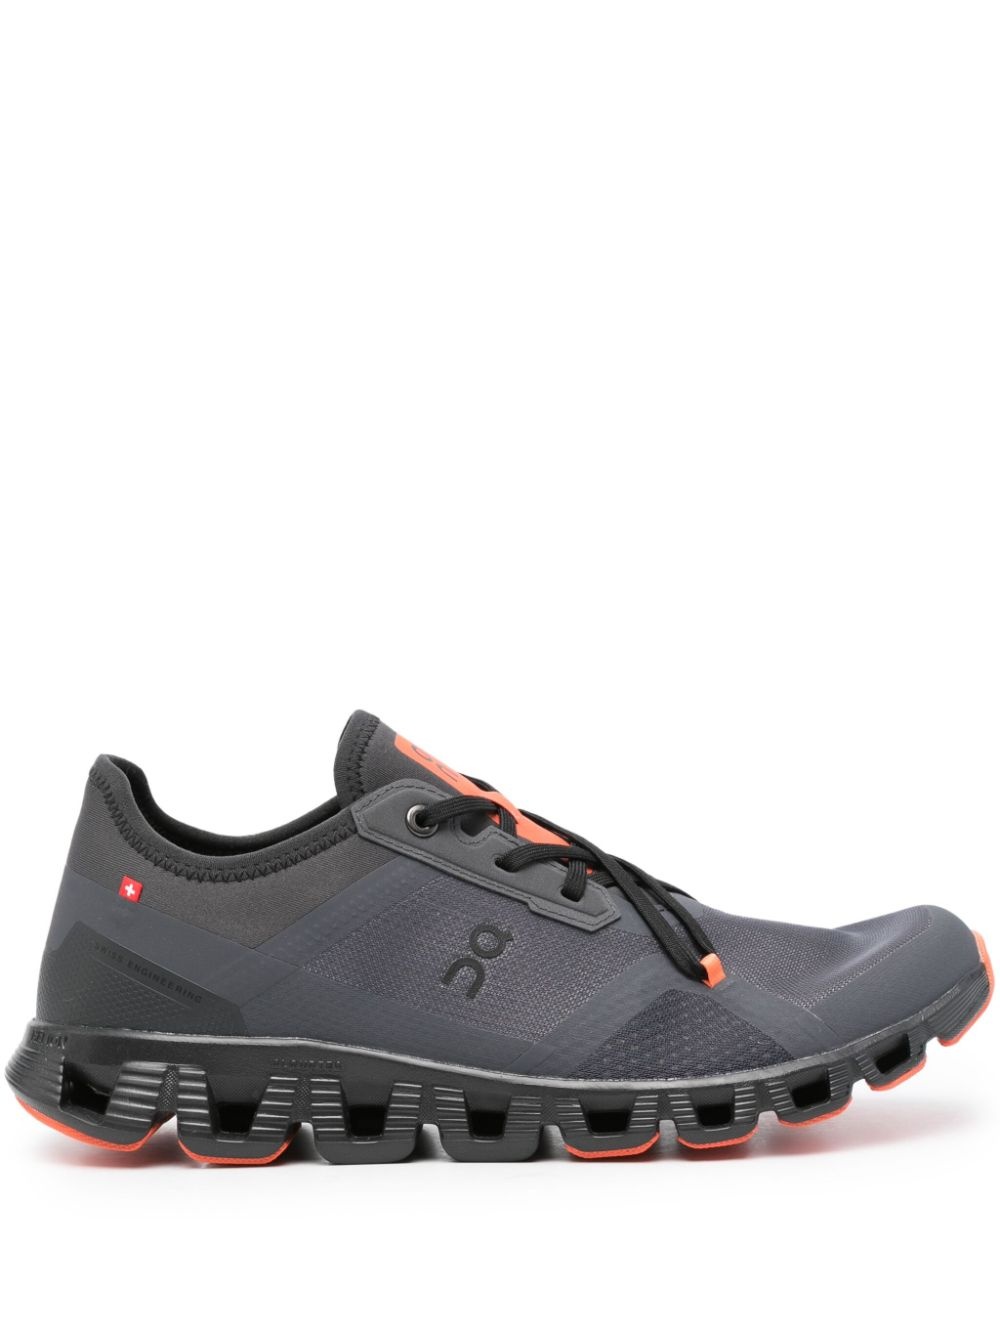 Cloud X 3 AD performance sneakers - 1